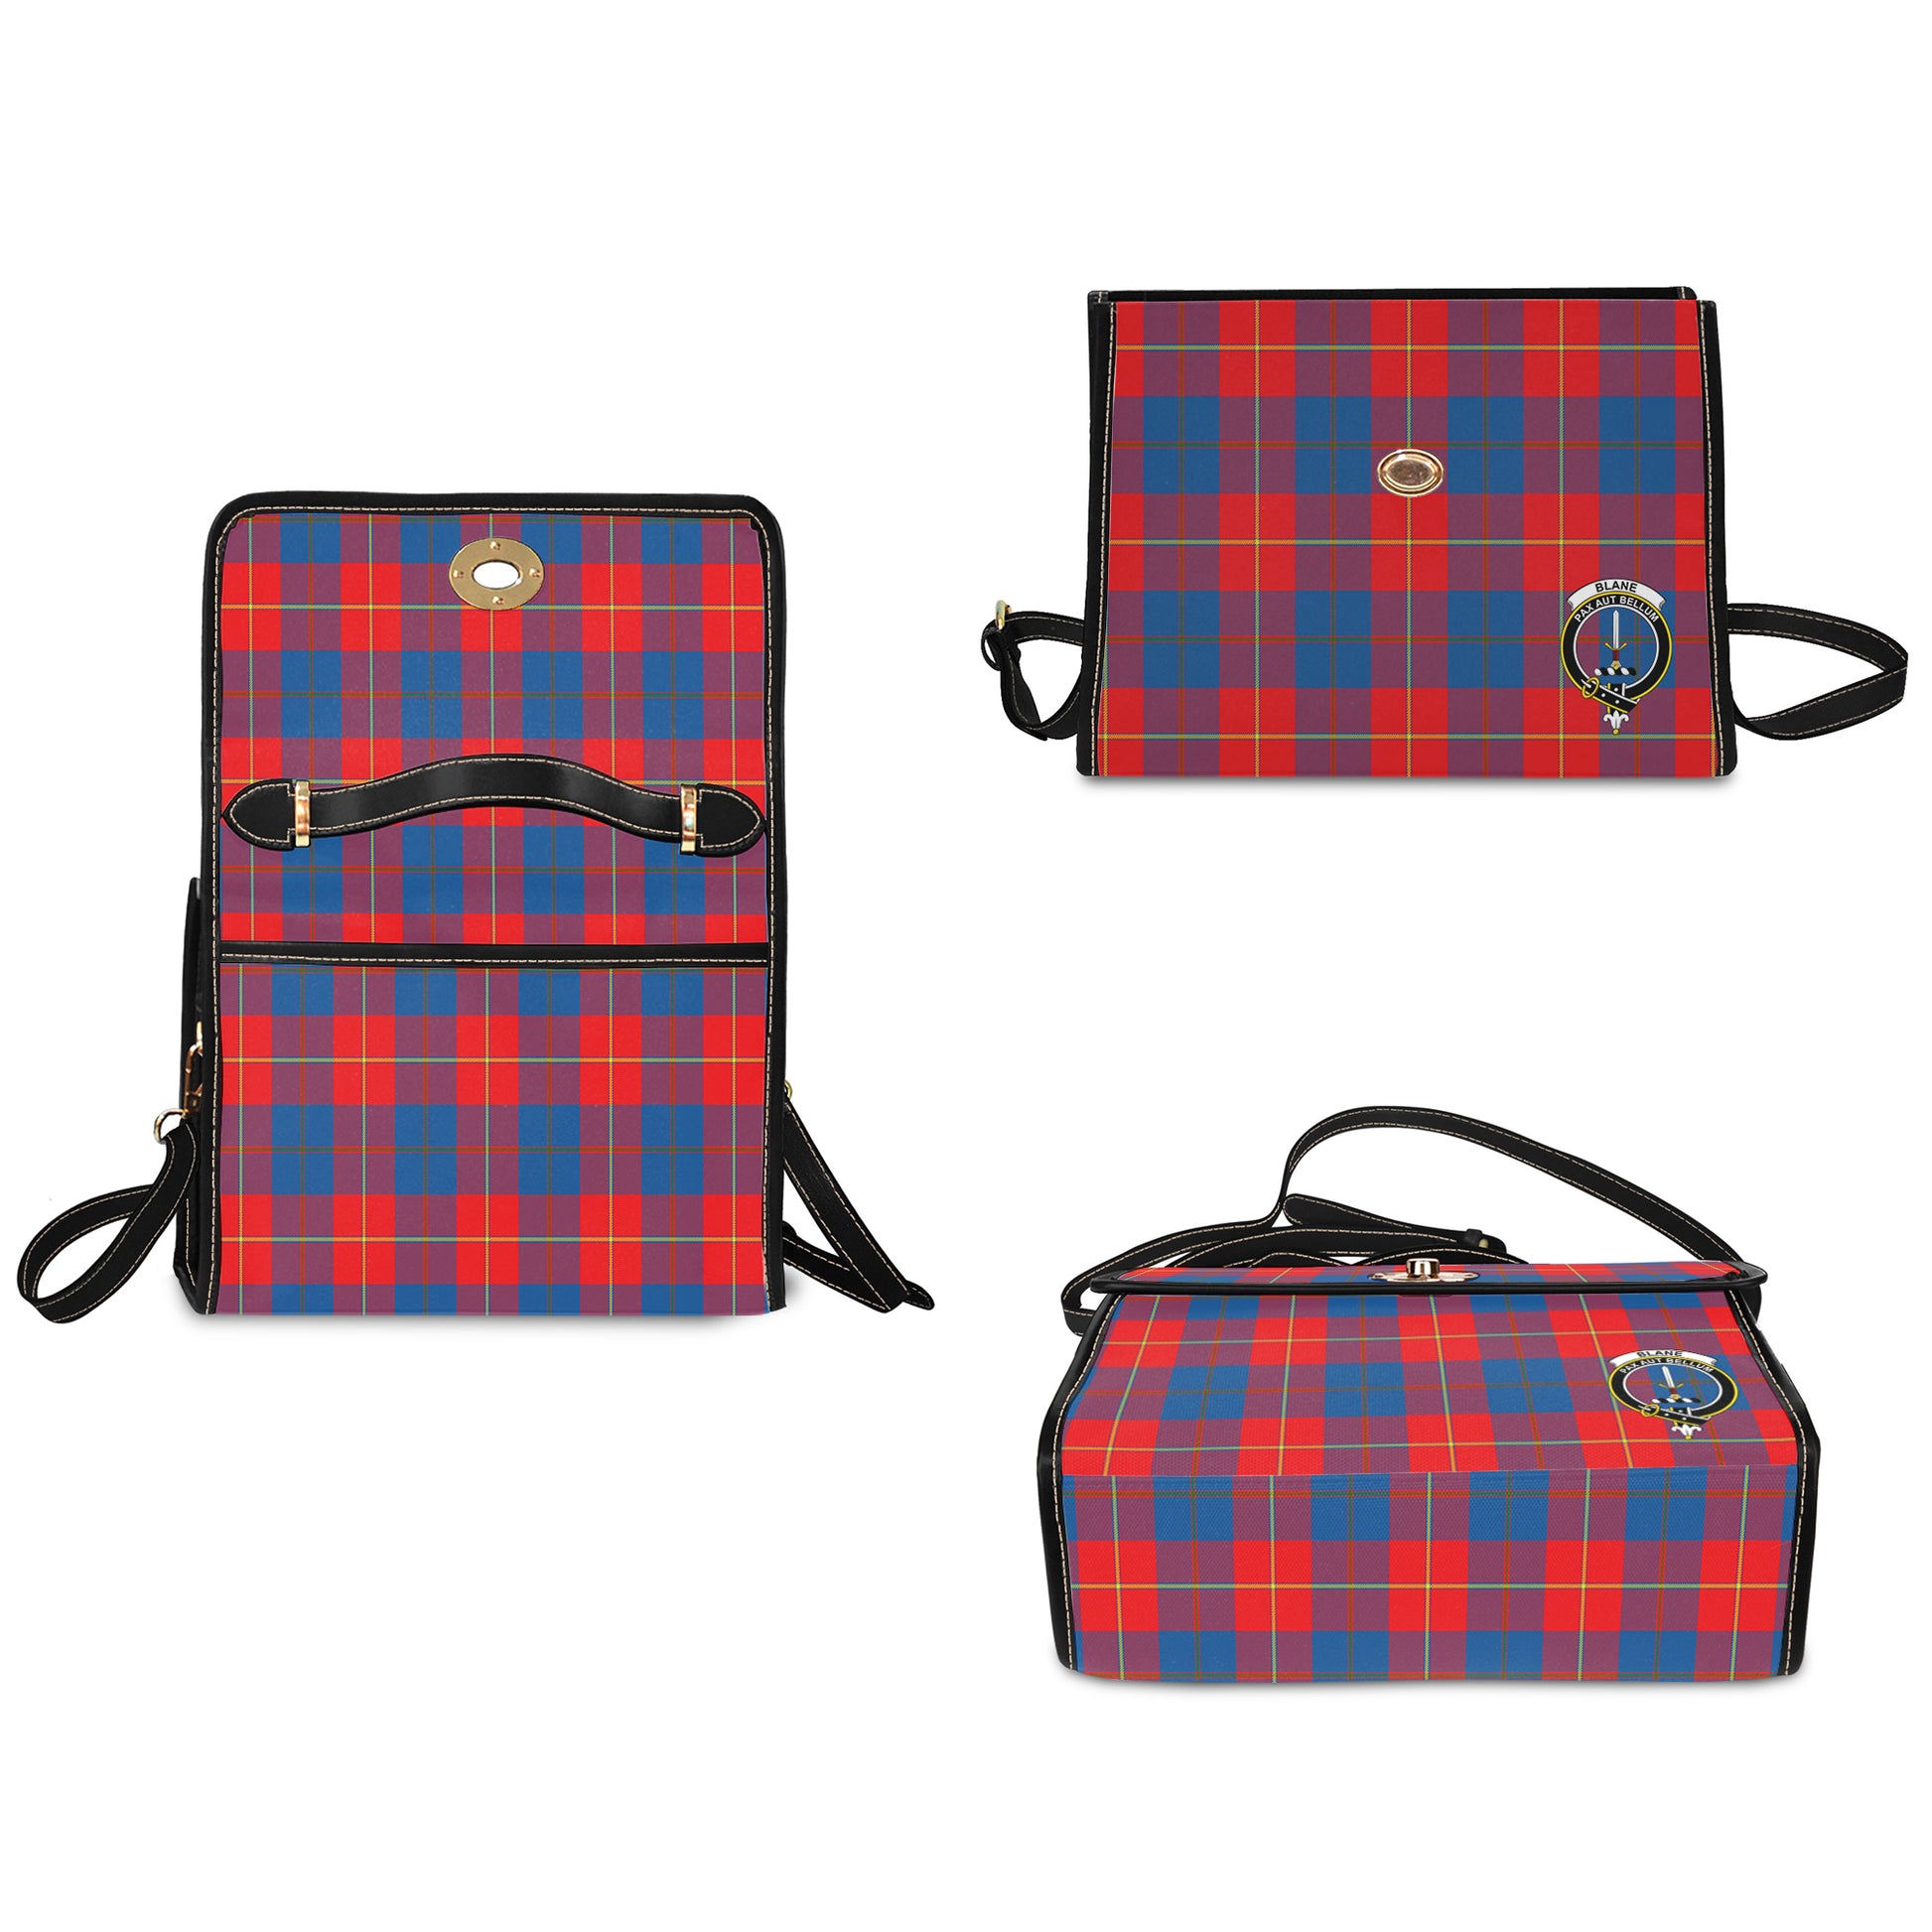 Blane Tartan Leather Strap Waterproof Canvas Bag with Family Crest - Tartanvibesclothing